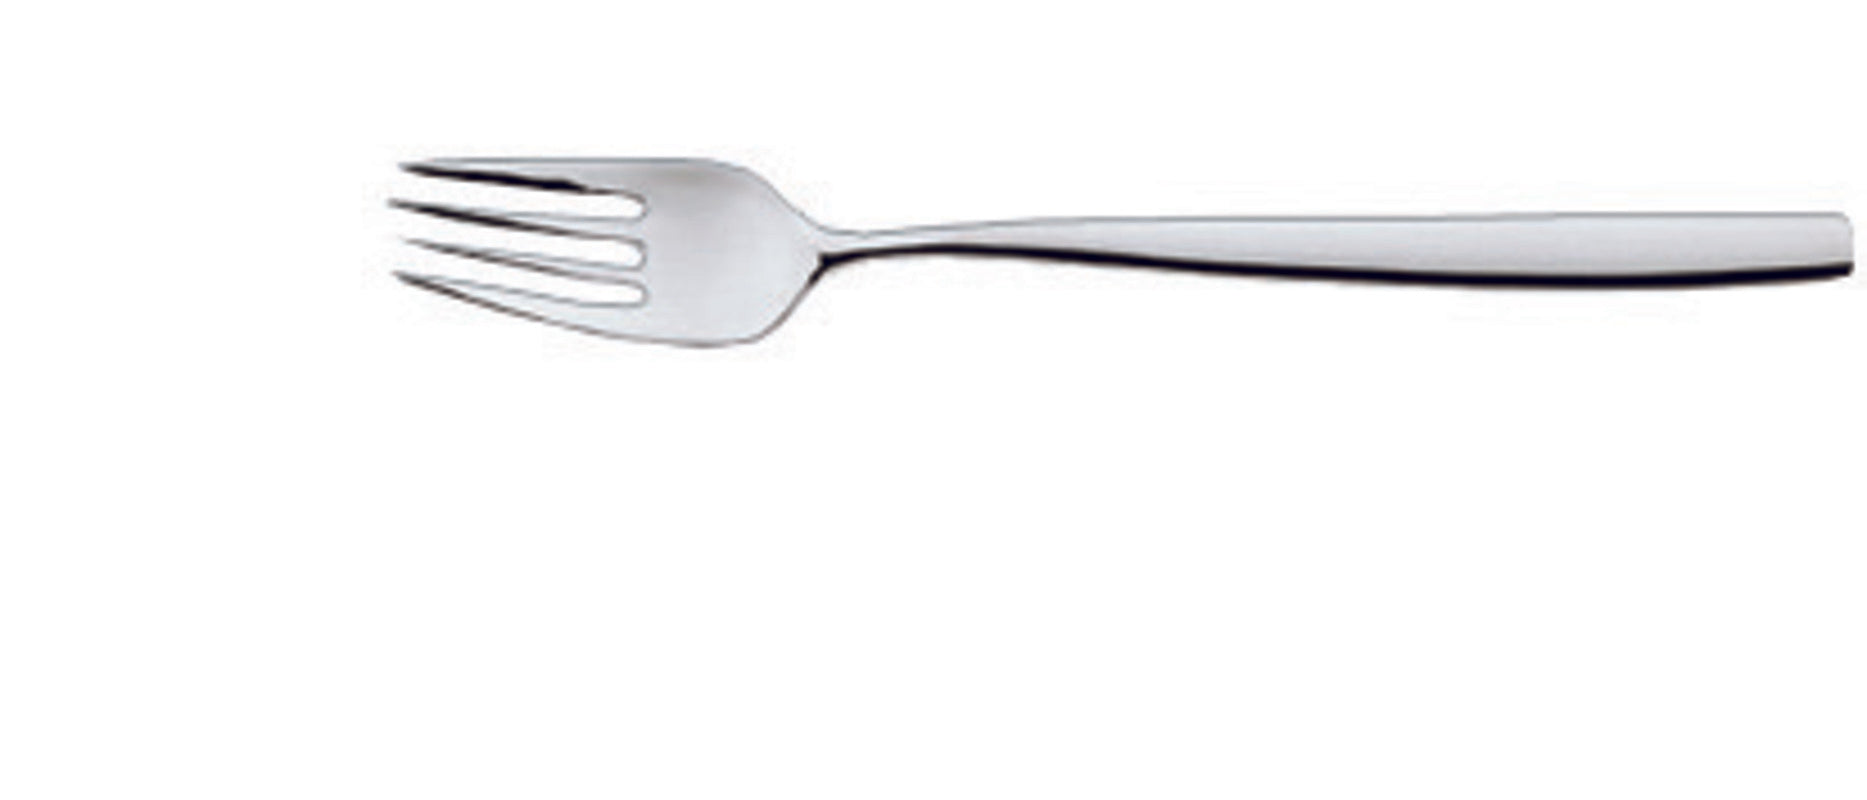 Table Fork 8